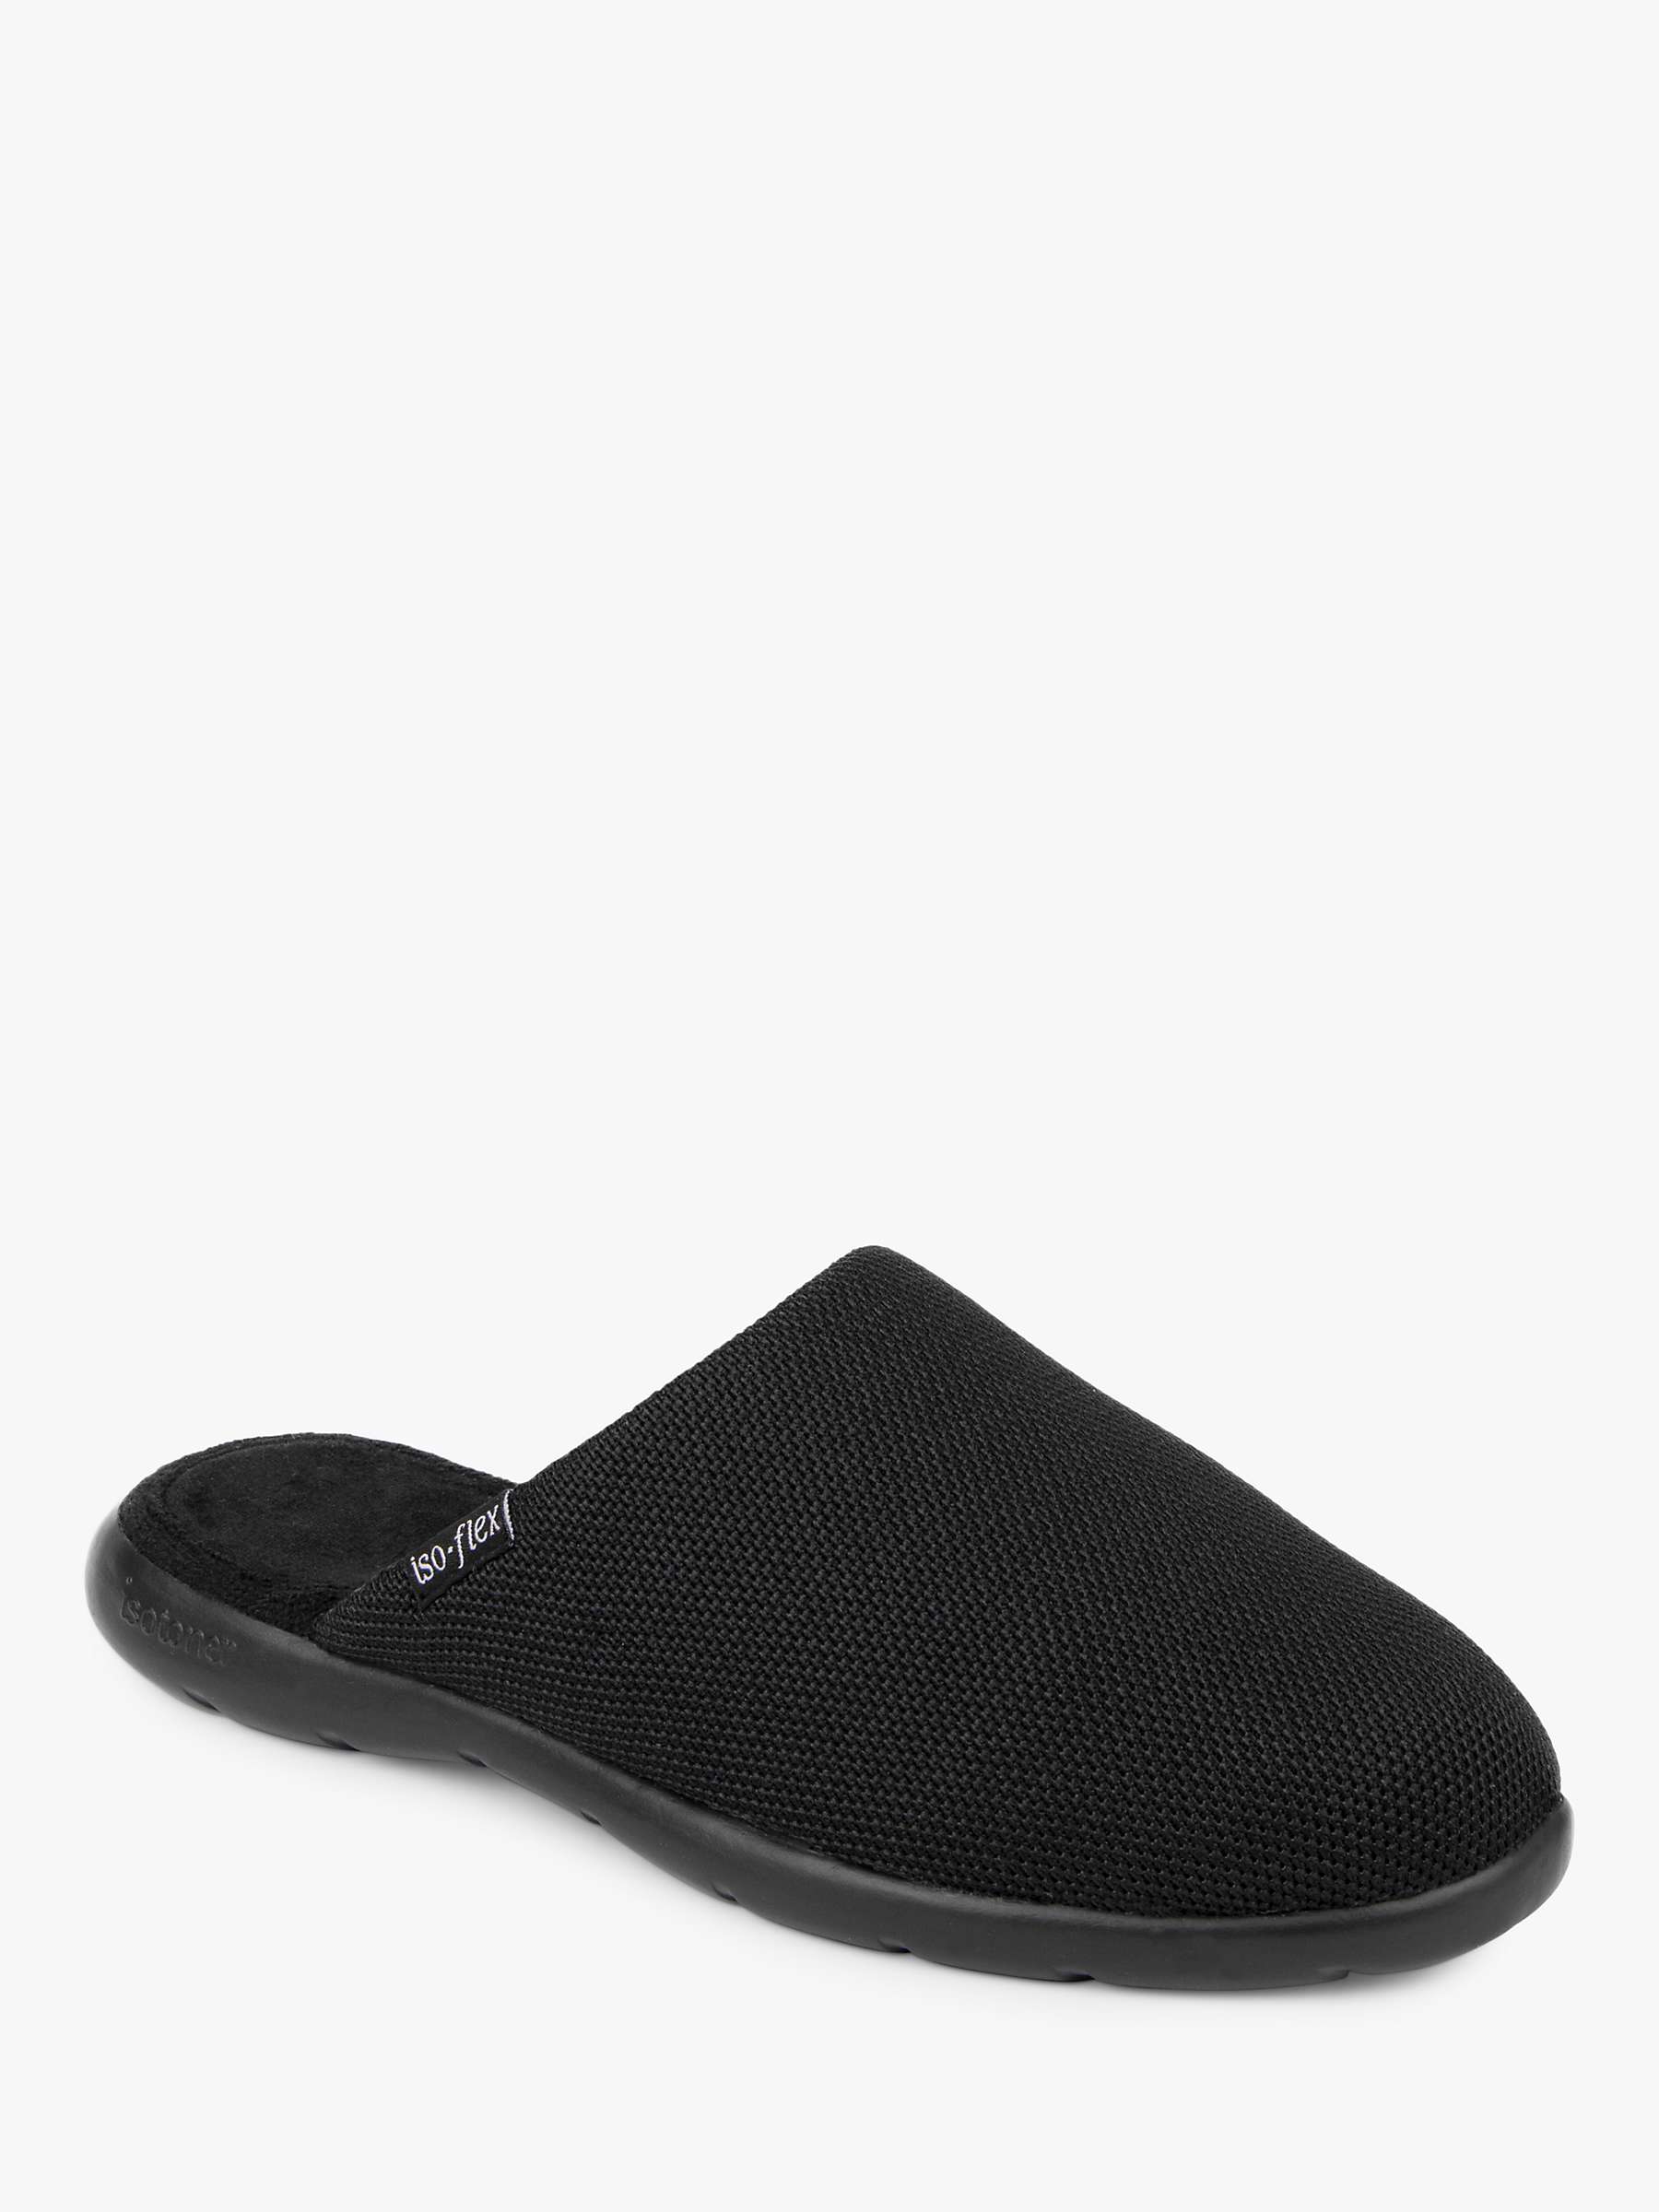 Buy totes Iso Flex Textured Mule Slippers, Black Online at johnlewis.com